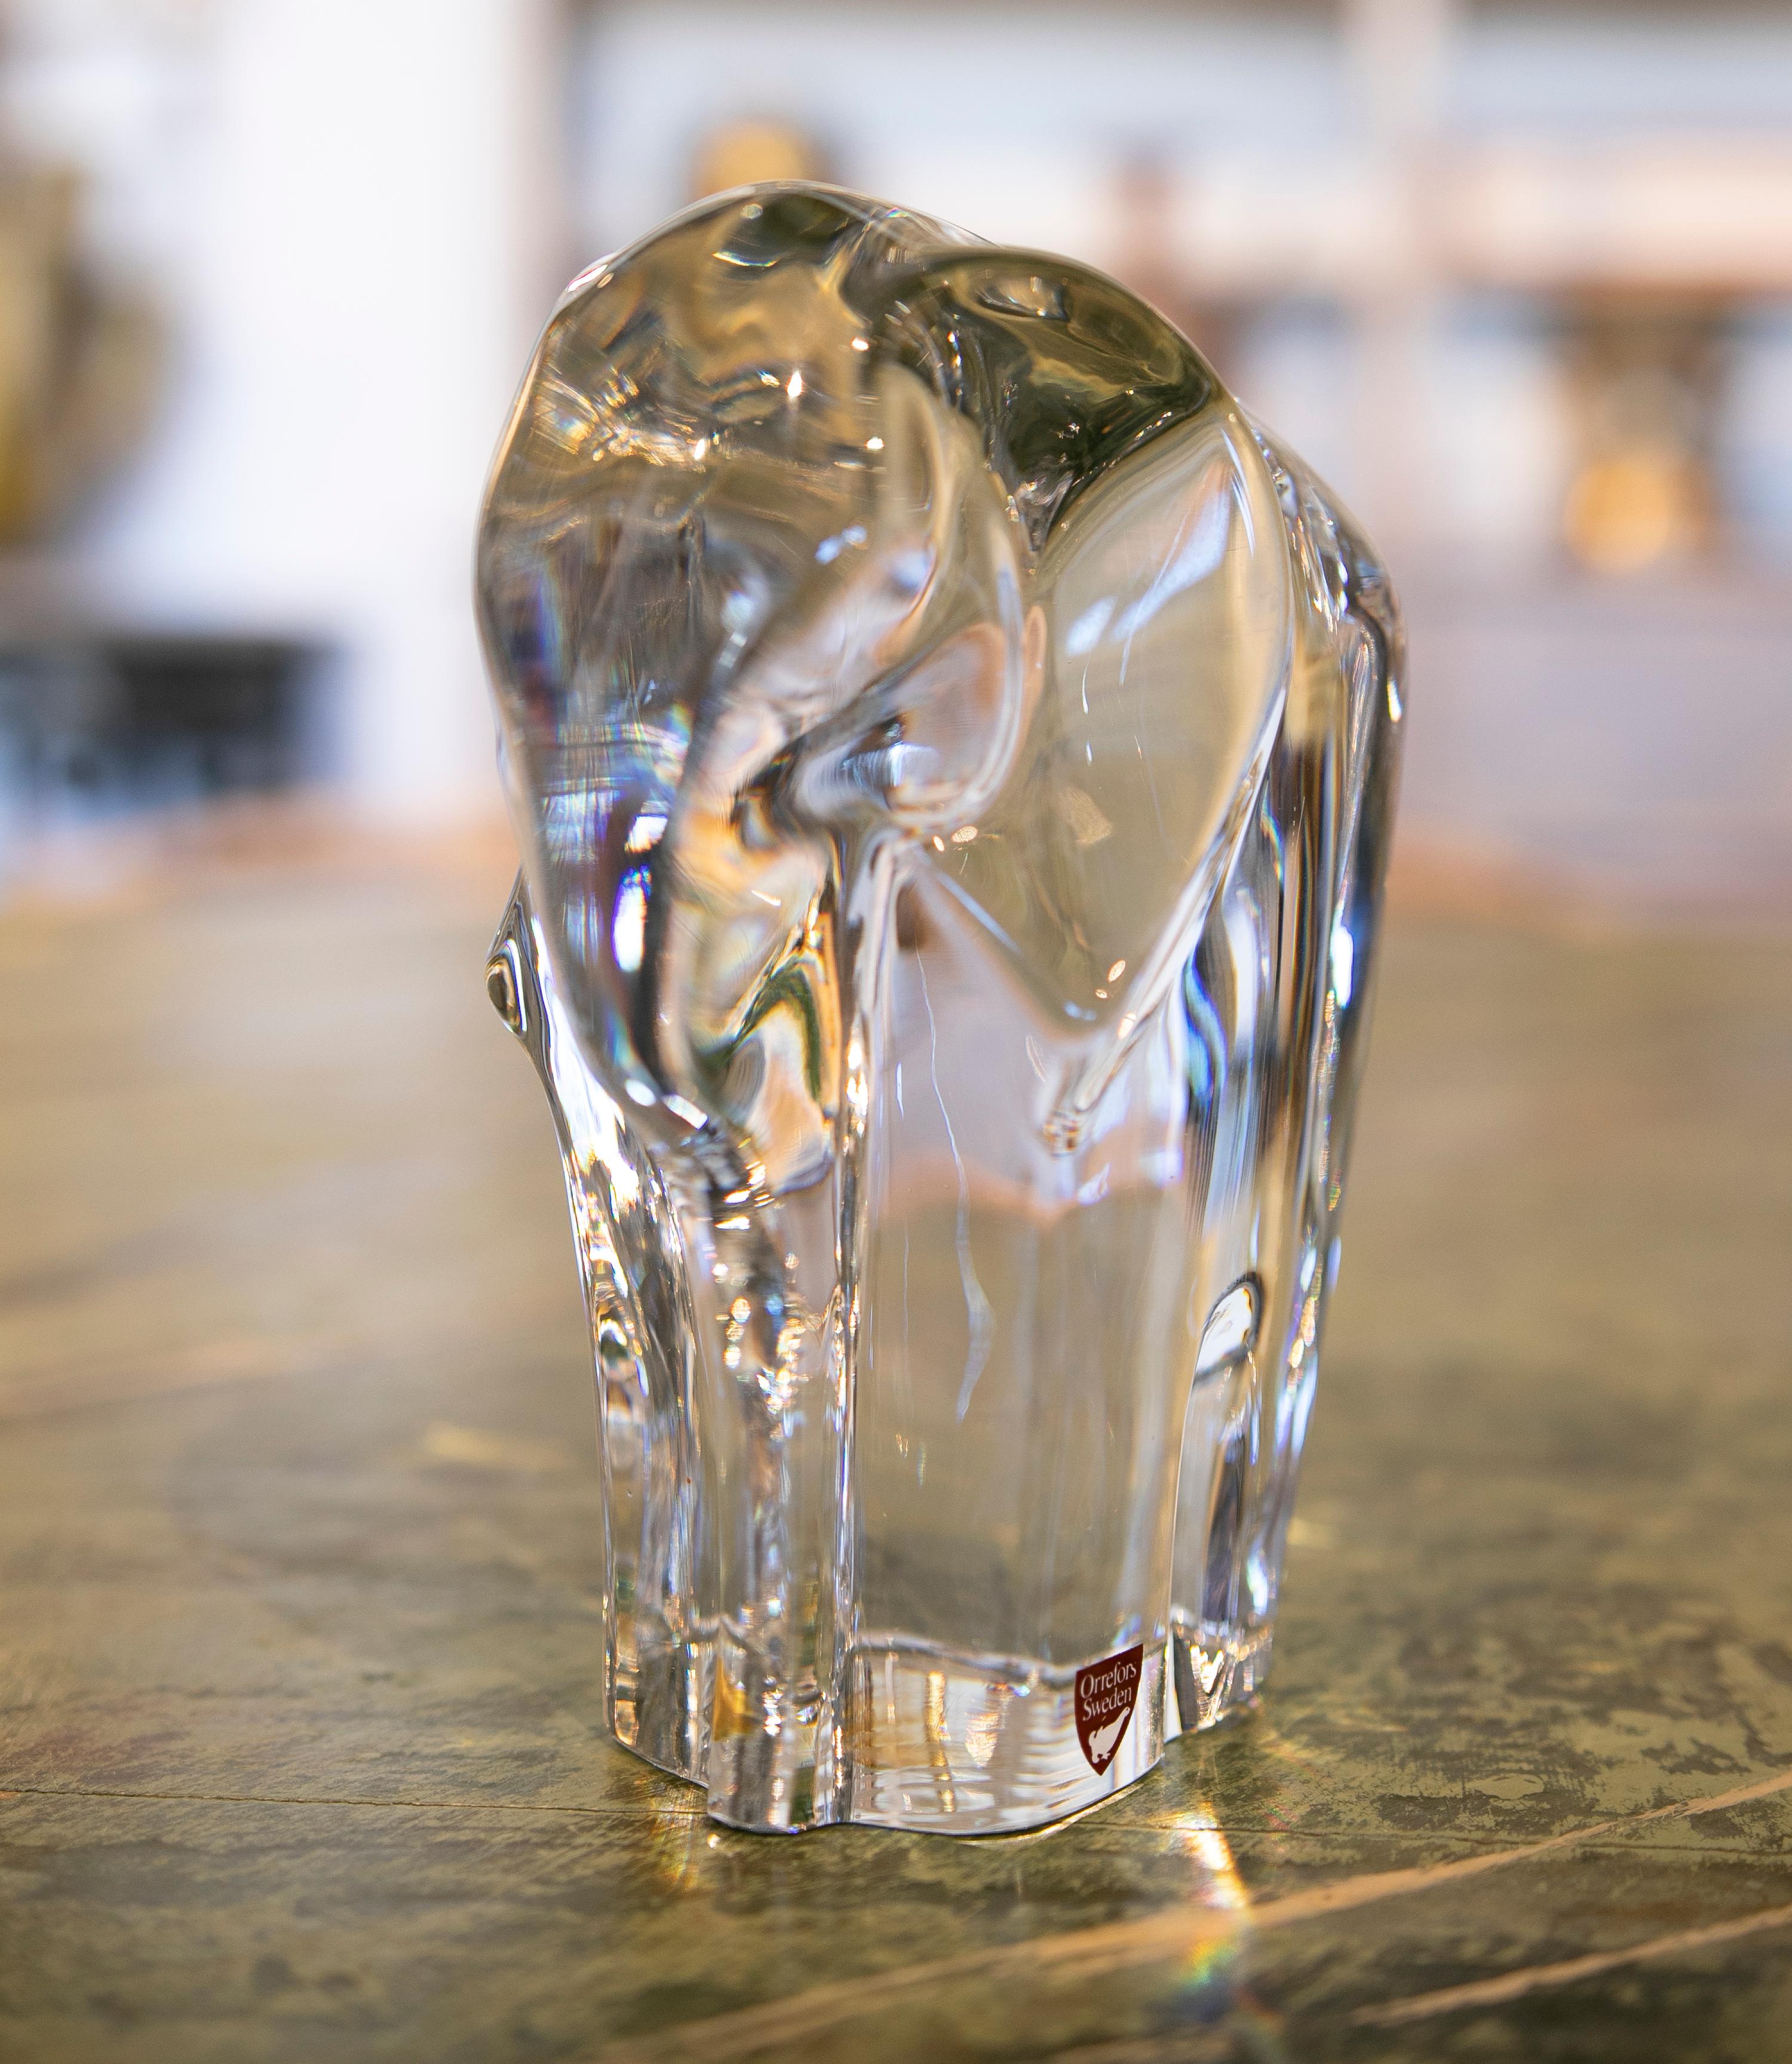 Orrefors Sweden glass elephant signed by the Artist Olle Alberius.